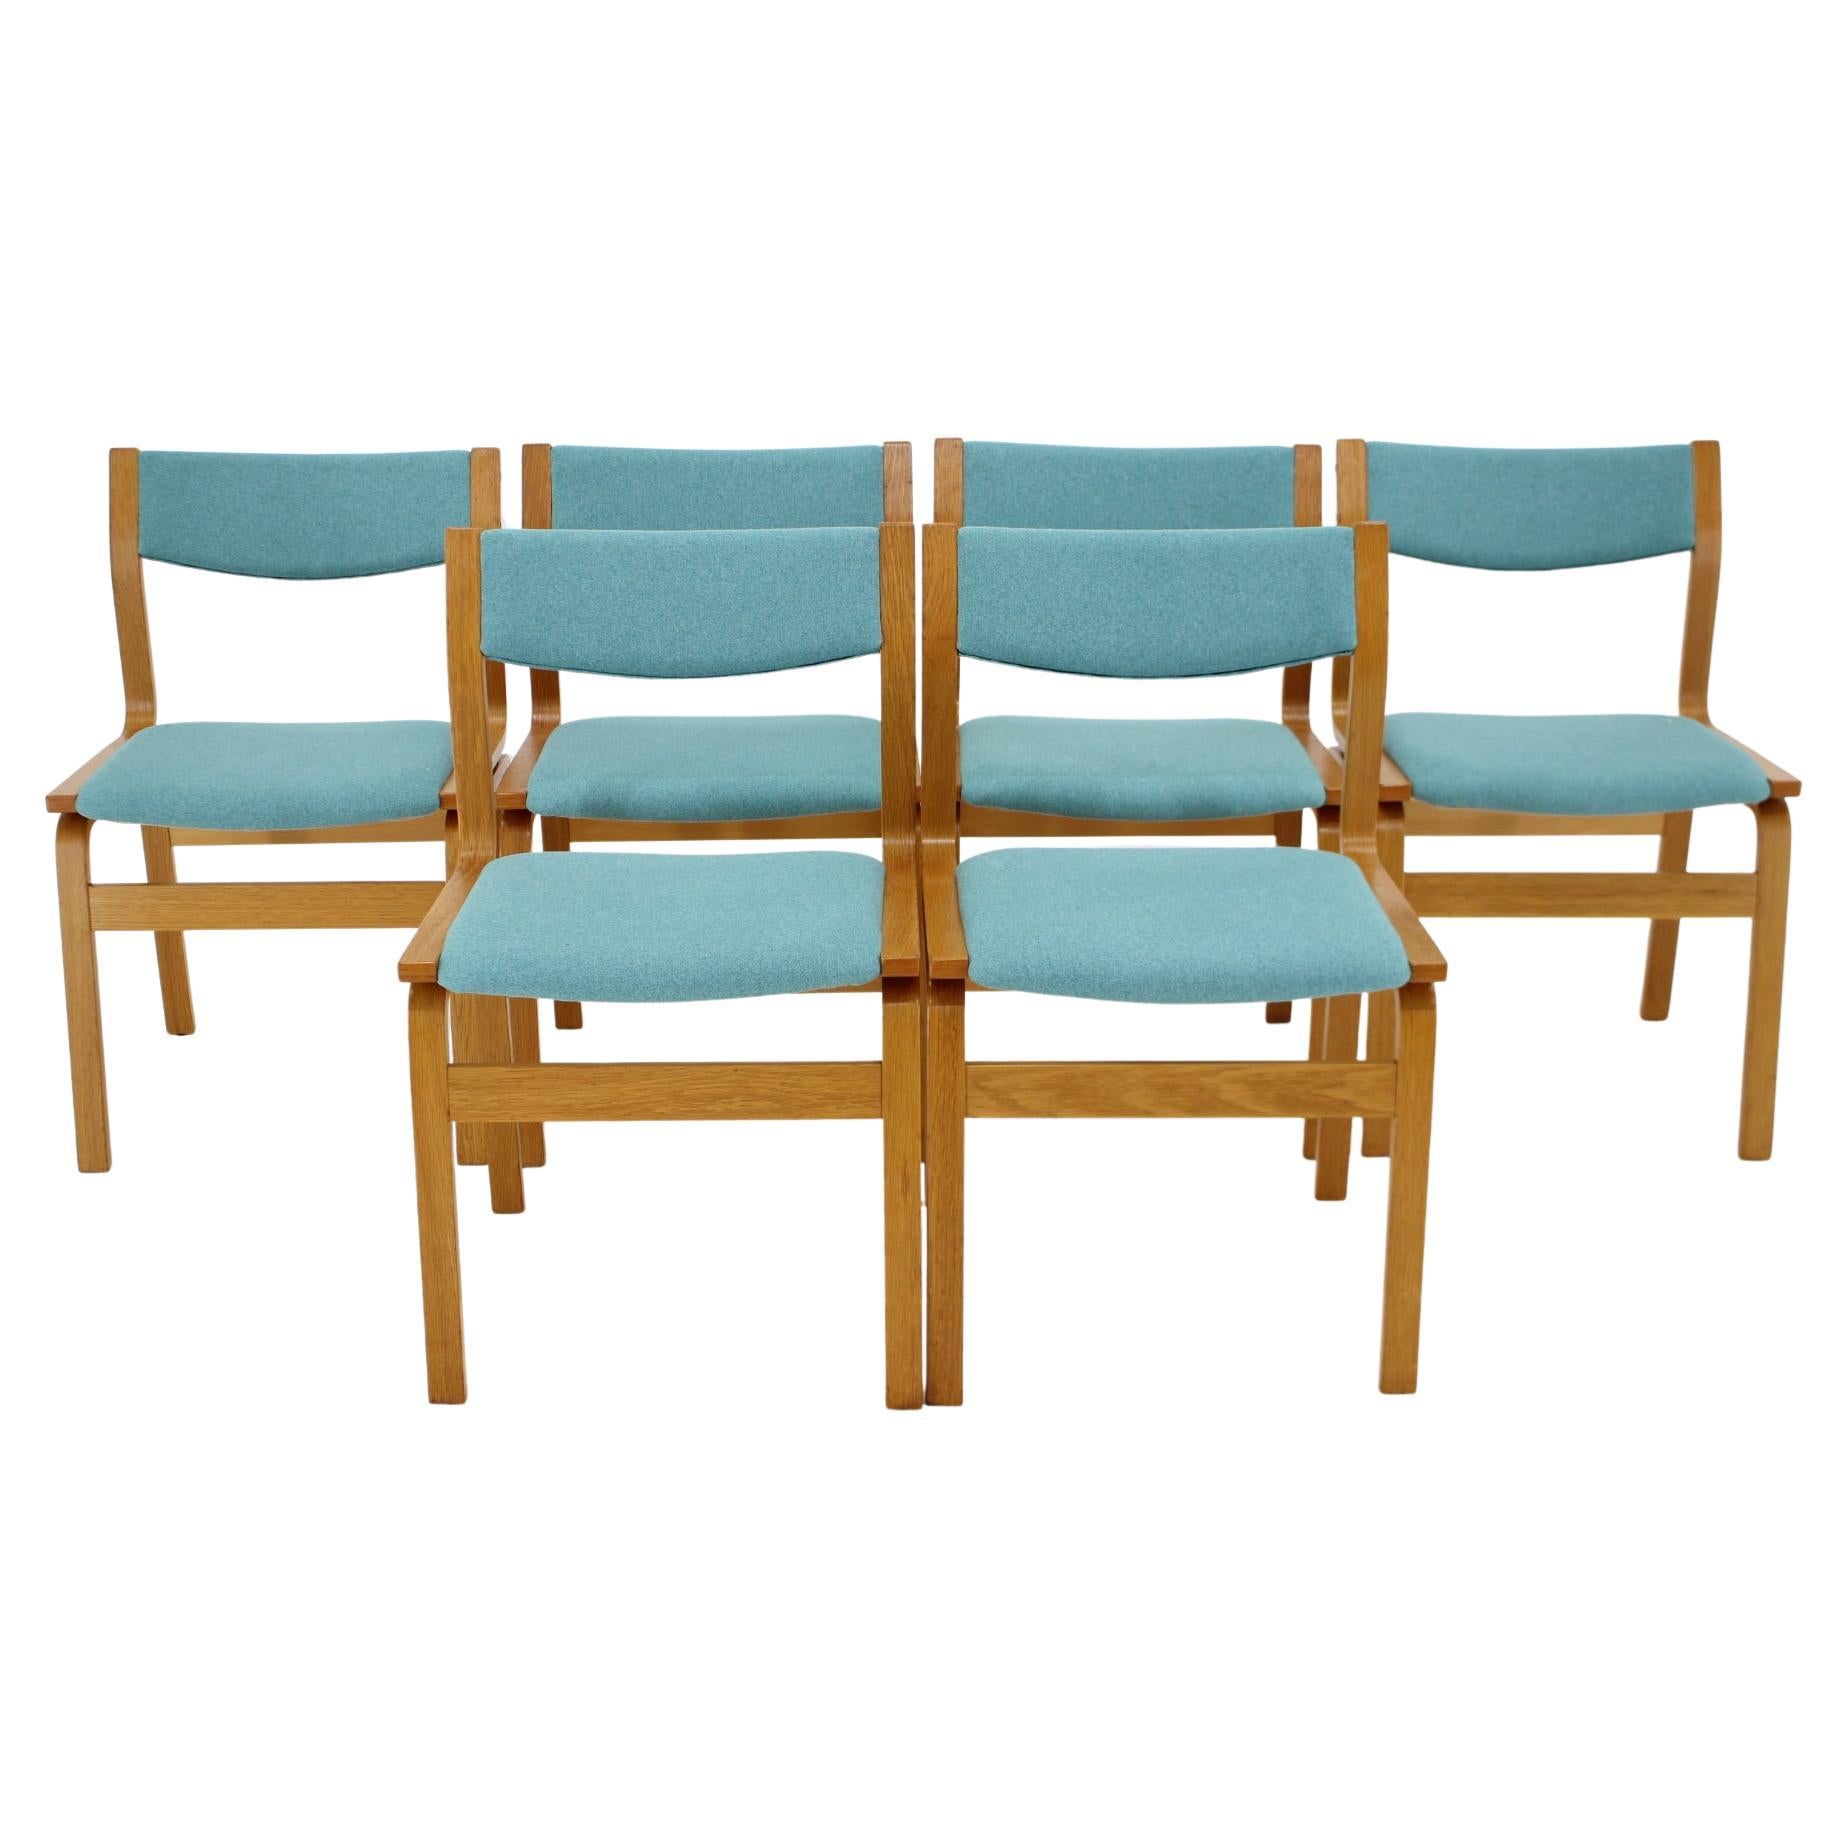 1960s Set of 6 Bentwood Dining Chairs, Denmark For Sale